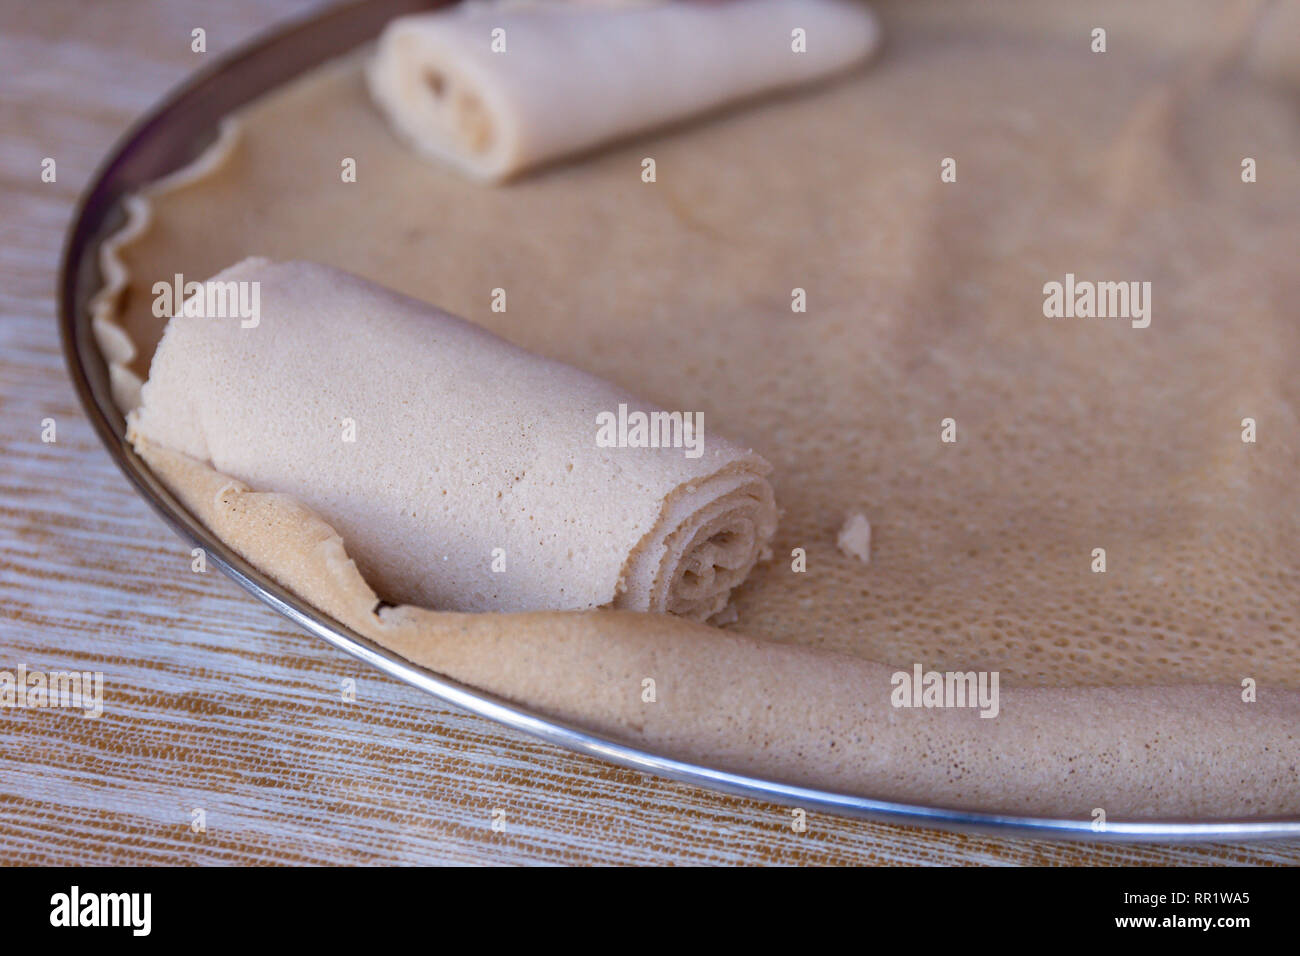 African food. Injera is a sourdough flatbread made from teff flour ...